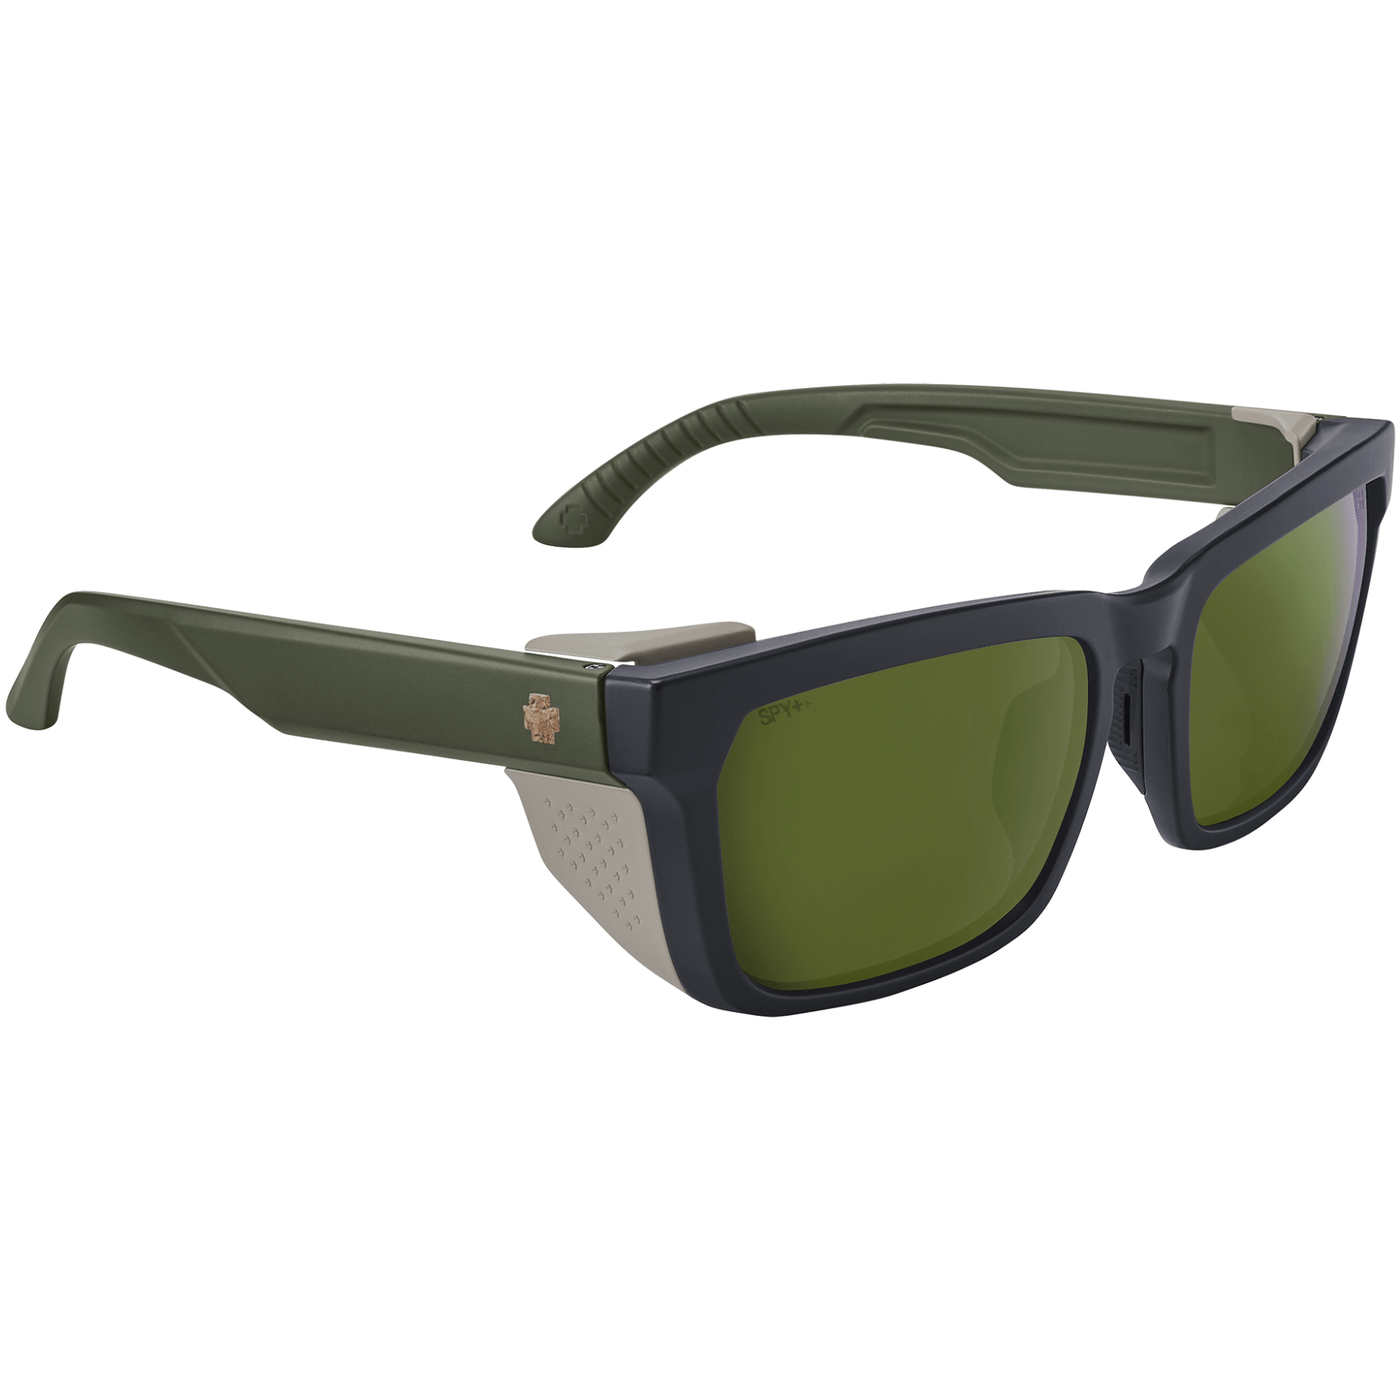 SPY HELM TECH Polarized Sunglasses, Happy Lens - Olive 8Lines Shop - Fast Shipping